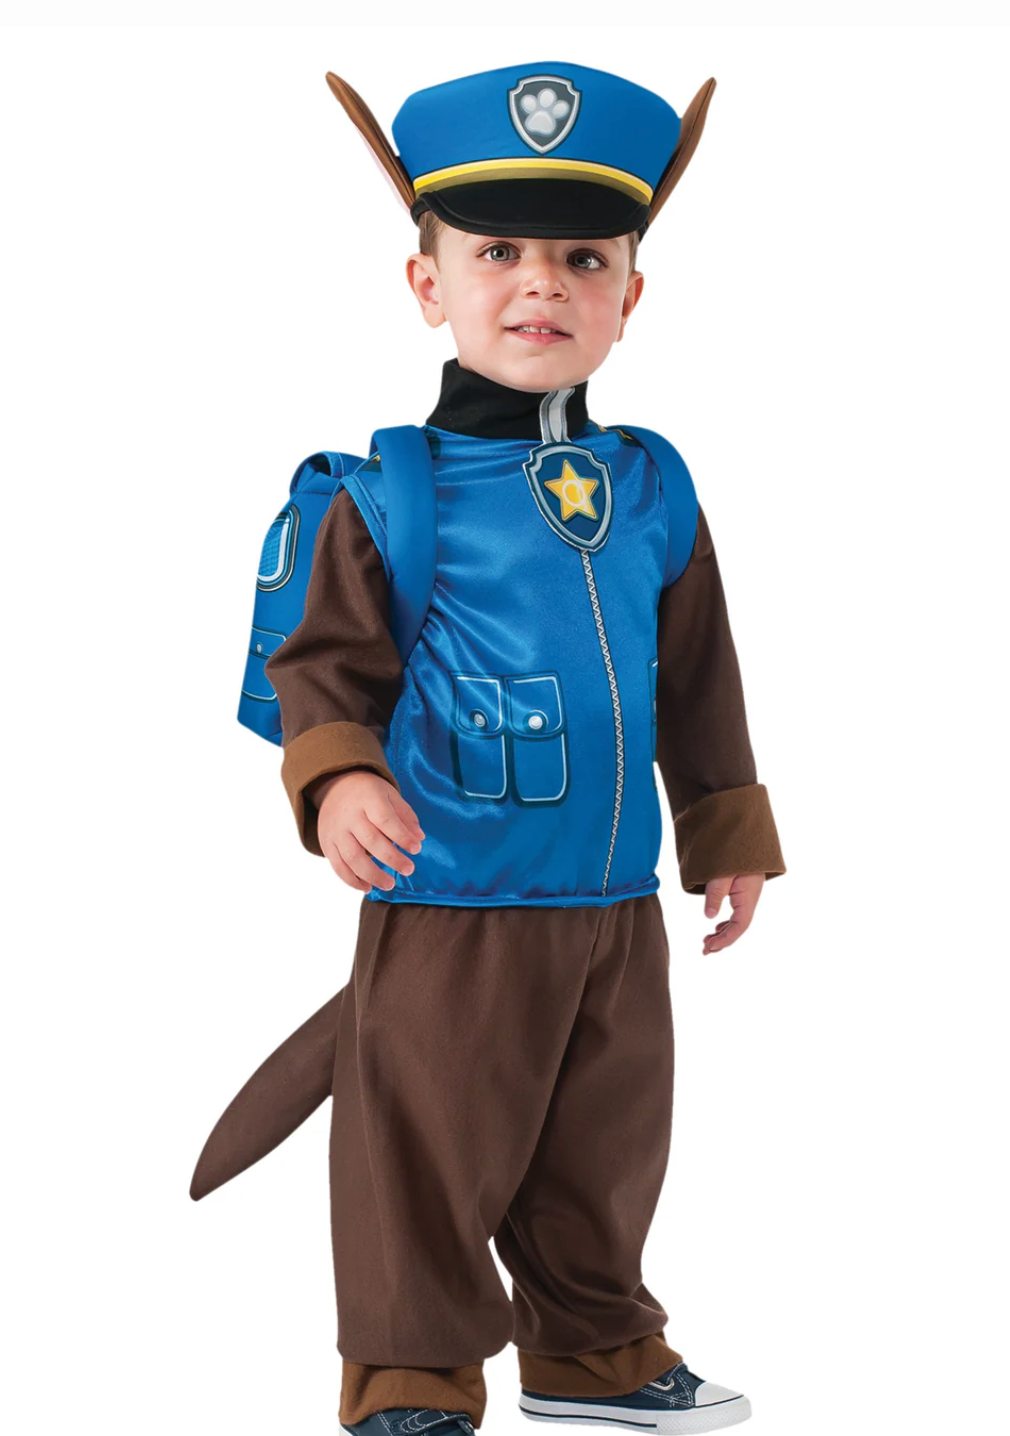 Patrol Adventures: Creating Exciting Halloween Memories with Your Little Officer